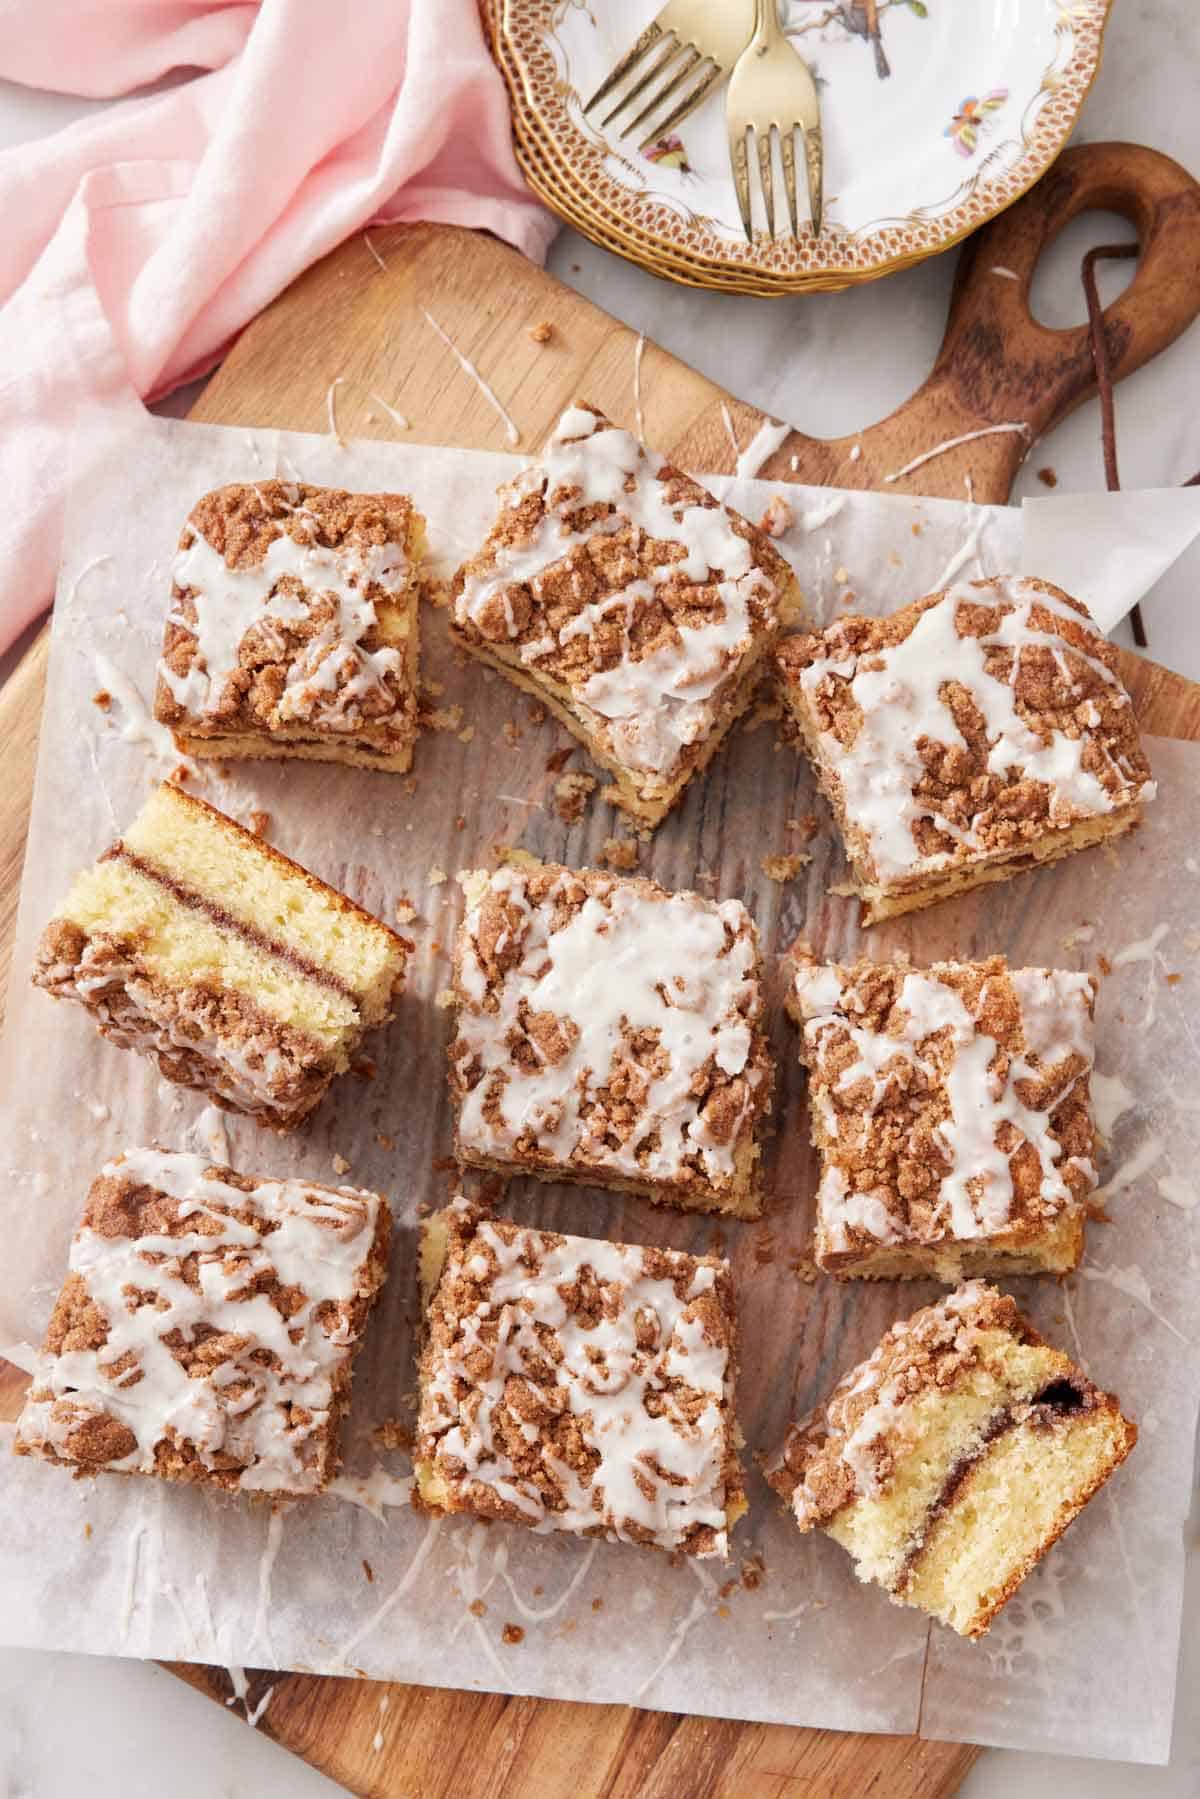 Overhead view of a serving board with nine pieces of coffee cake topped with a glaze.